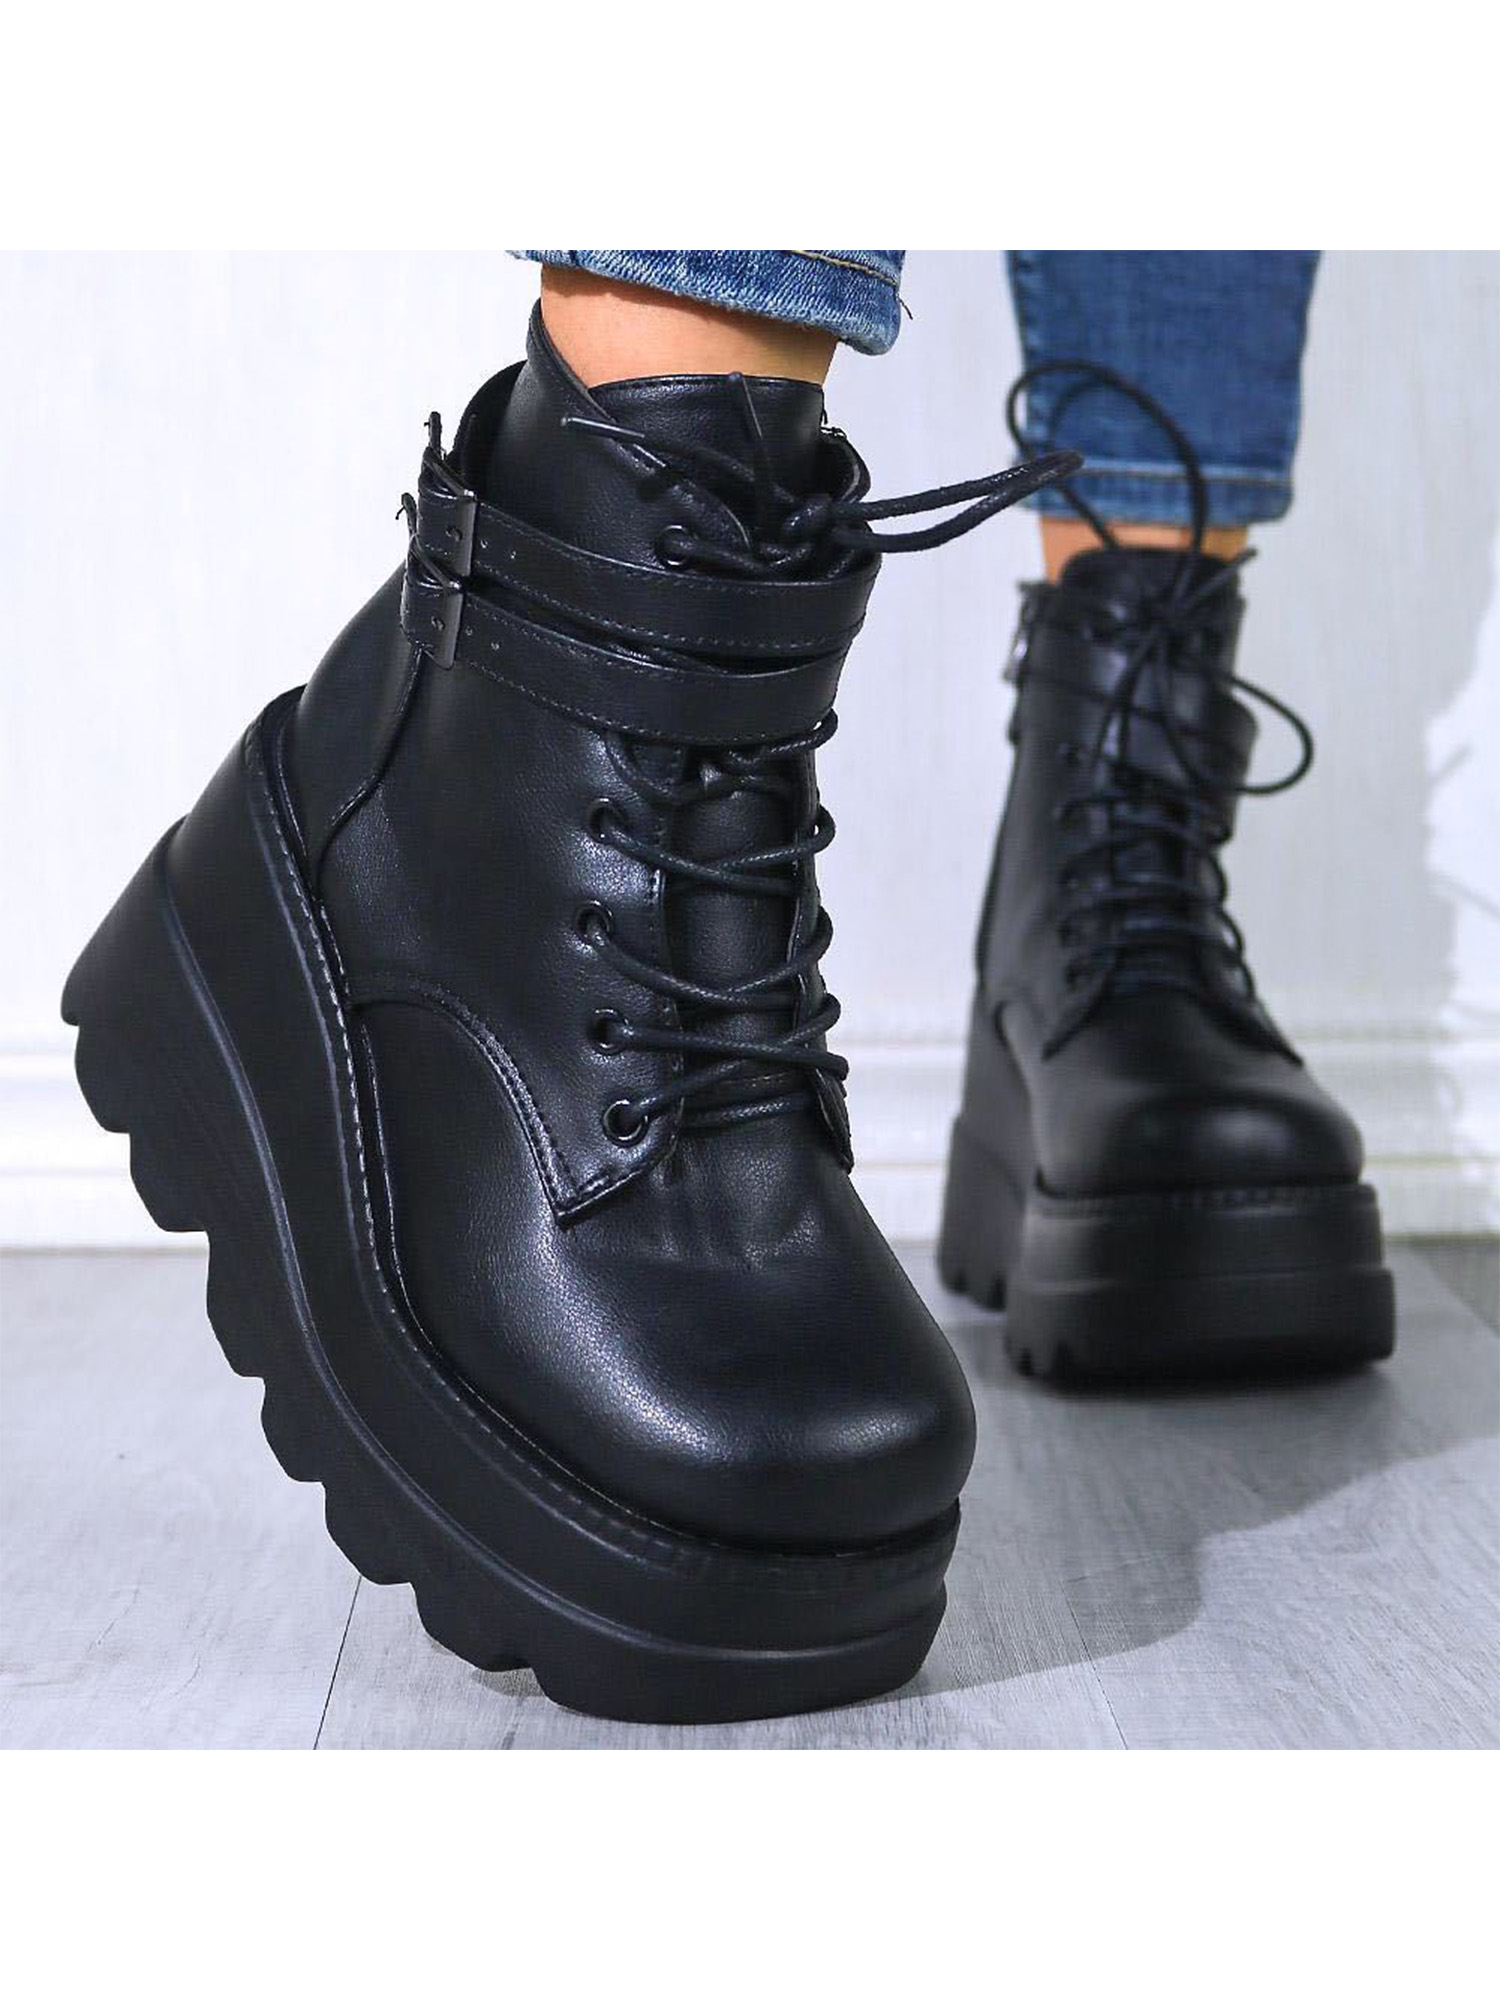 Wazshop Womens Shoes Platform Shoes Ankle Boots High Heel Shoes Round Toe Casual Shoes - image 4 of 4